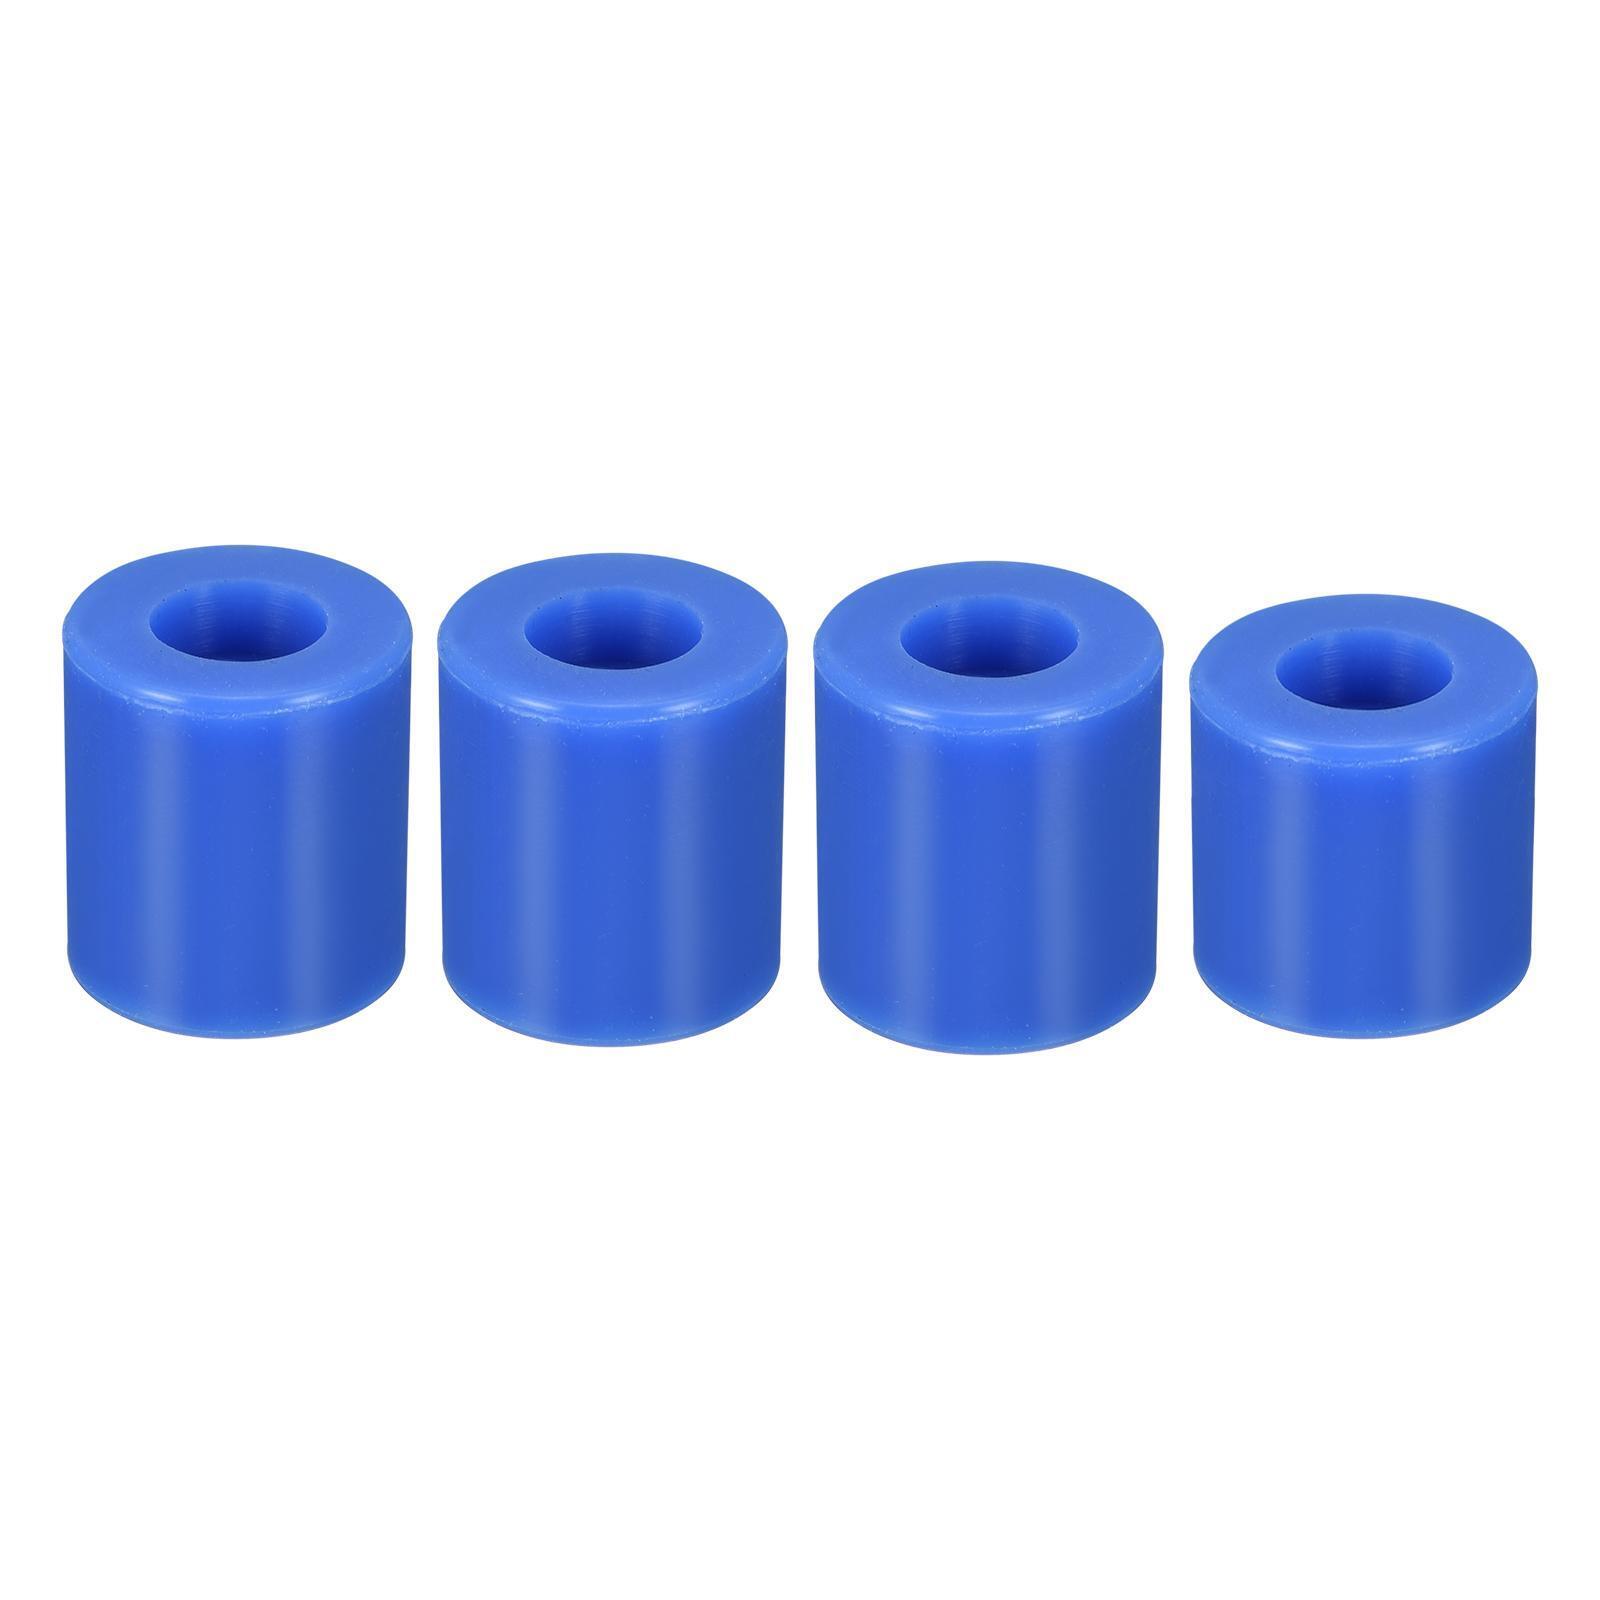 16mm/18mm 3D Printer Heat Bed Parts, Silicone Solid Bed Mounts,Blue 1set